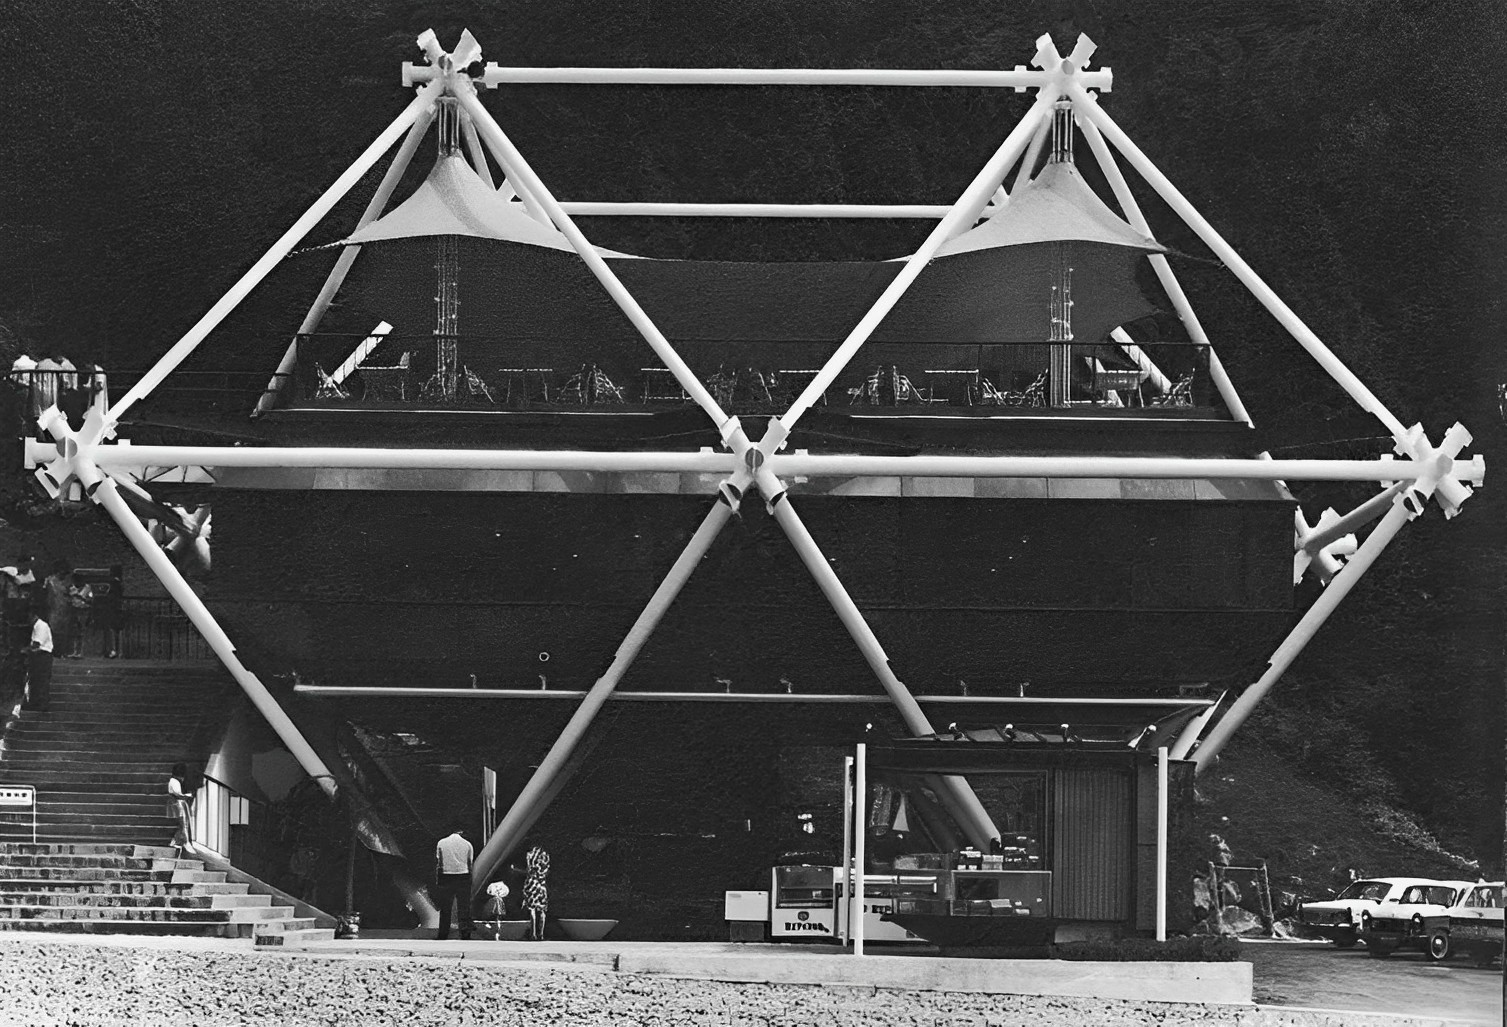 (10) The Odakyu Drive-In Restaurant, Otome Toge, 1969, was the first Metabolist building that really looked changeable: a giant, white space frame holds a red tent and brown capsule dining room. The exaggerated joints not only startle the passing motorist (roadside architecture) but are designed to be easily added to or dismantled. The joint swallows the building and the building swallows the joint (it is a restaurant). Actually, the antagonistic coexistence is the relation between the harmonious space and the inharmonious joint, which is placed dead centre in the restaurant.